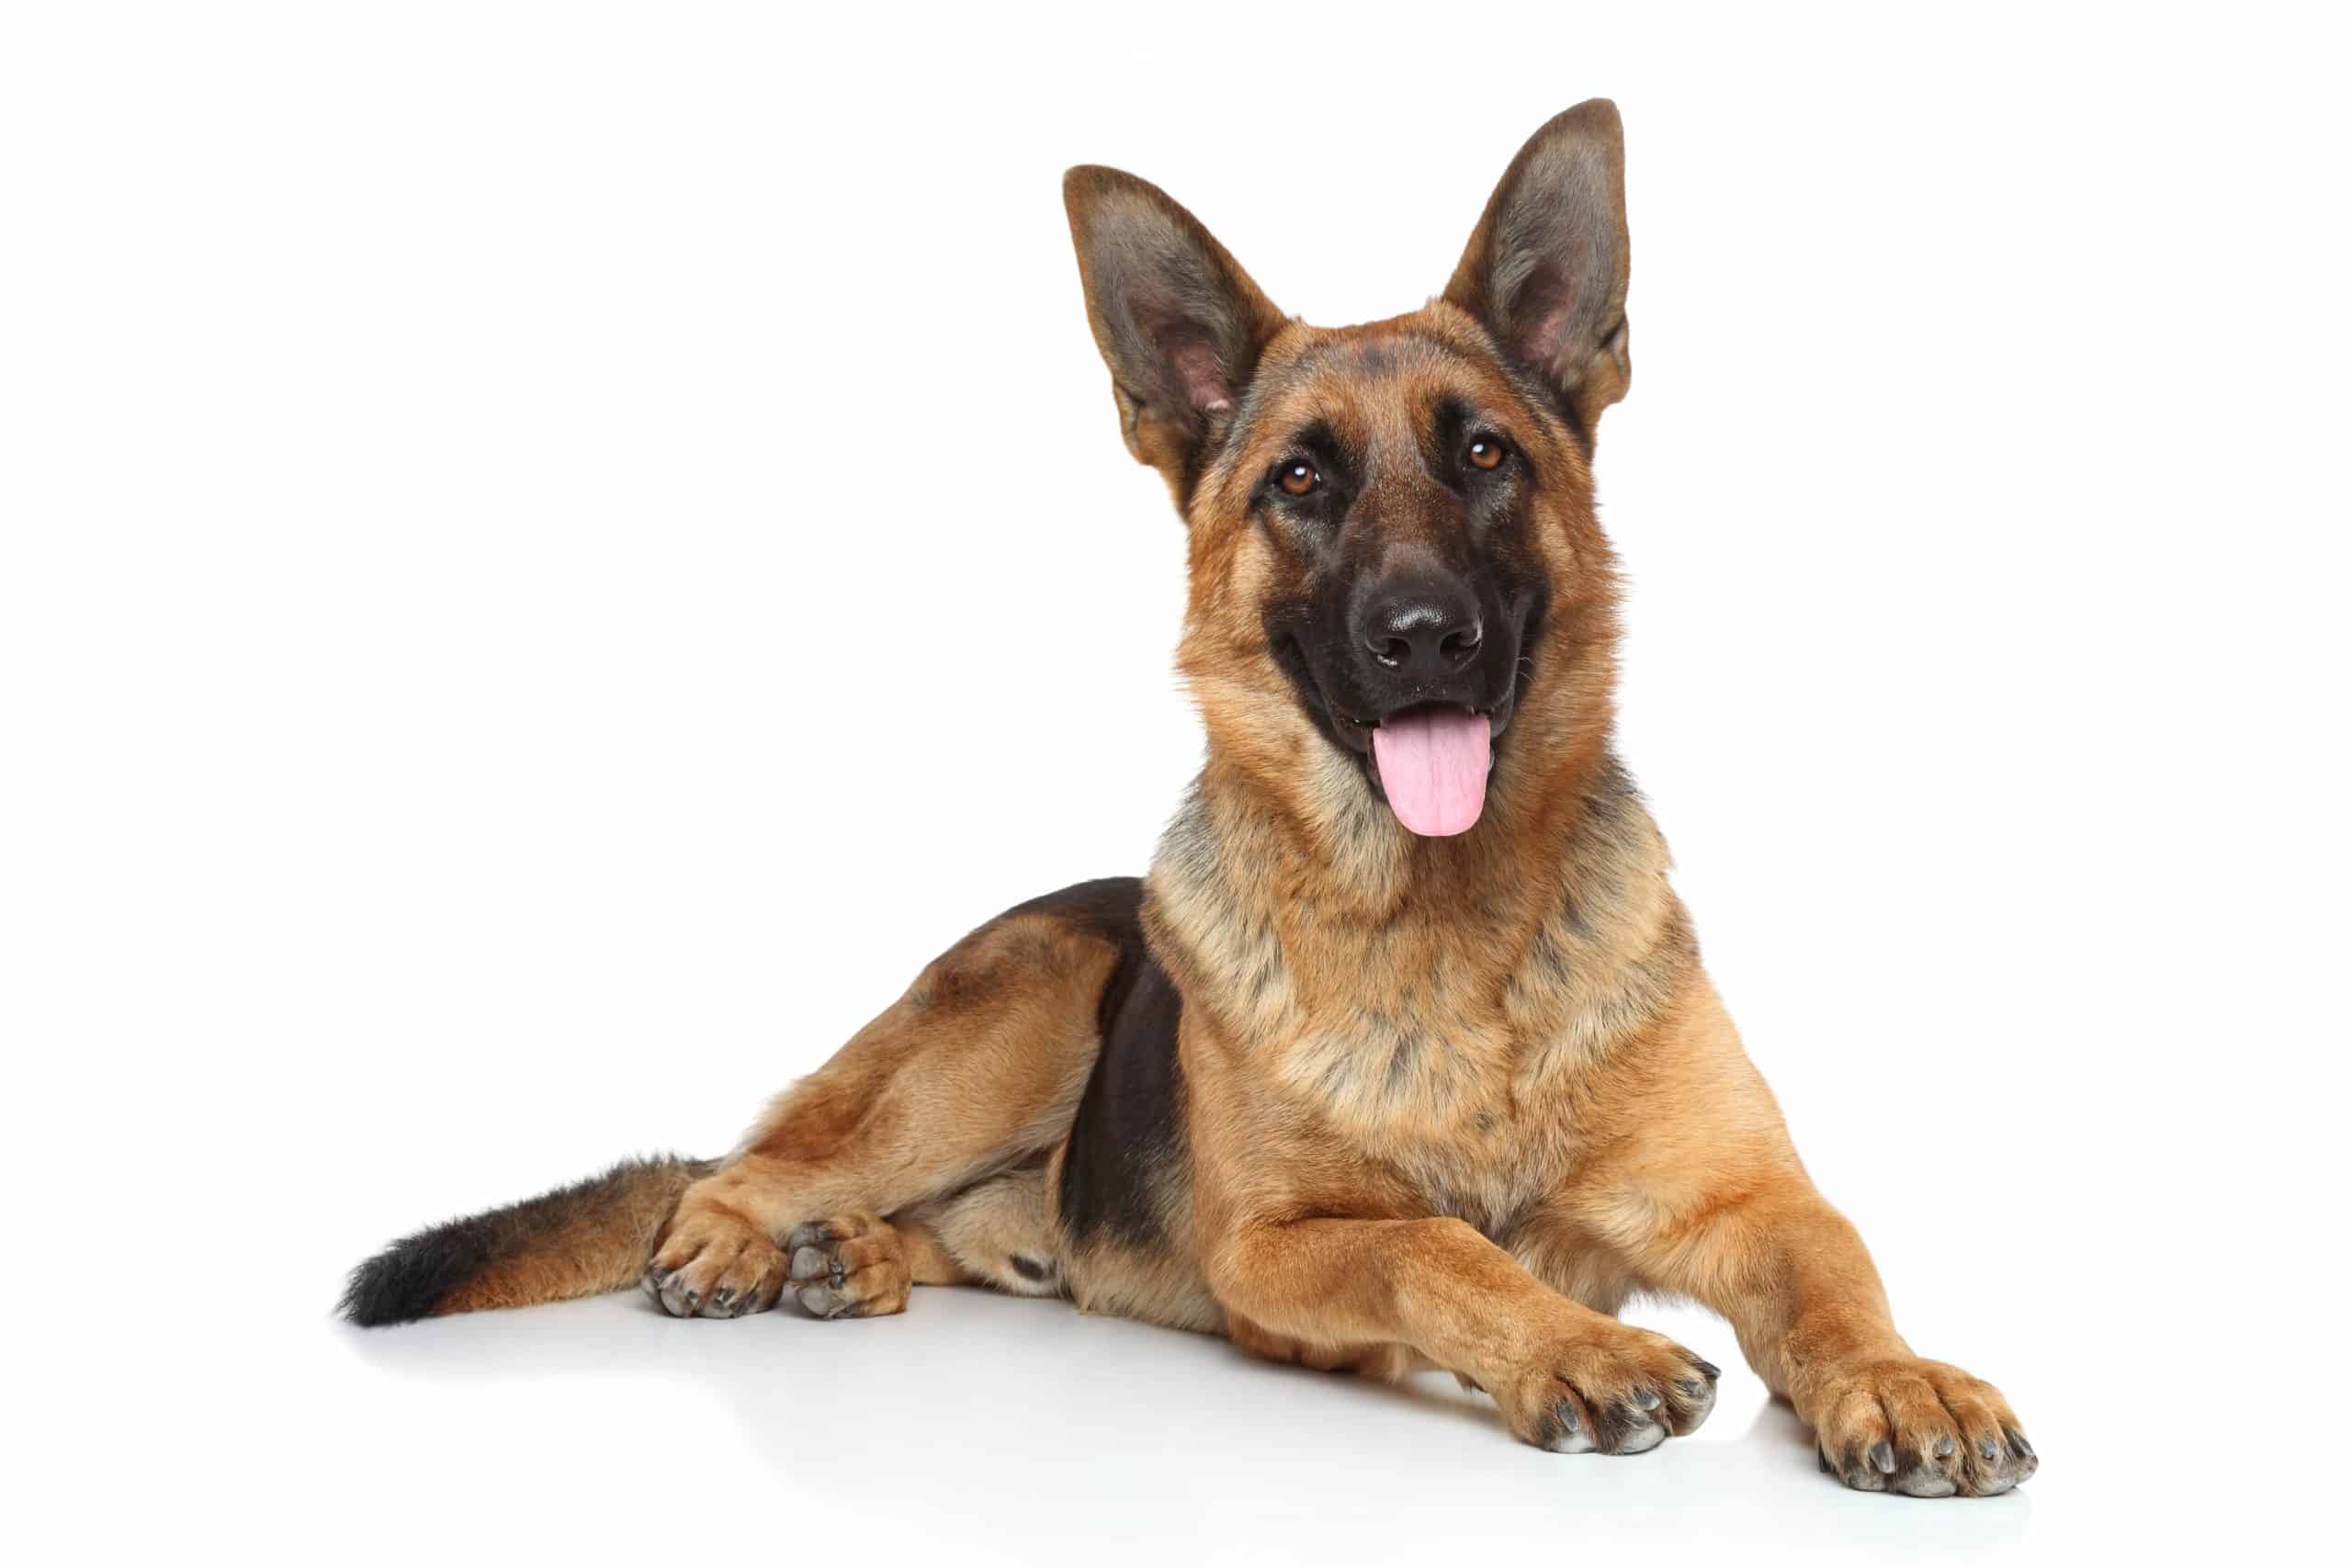 German Shepherd on white background. To keep your dog healthy, provide proper German Shepherd care including the best nutrition, playtime, space, and routine vet visits.